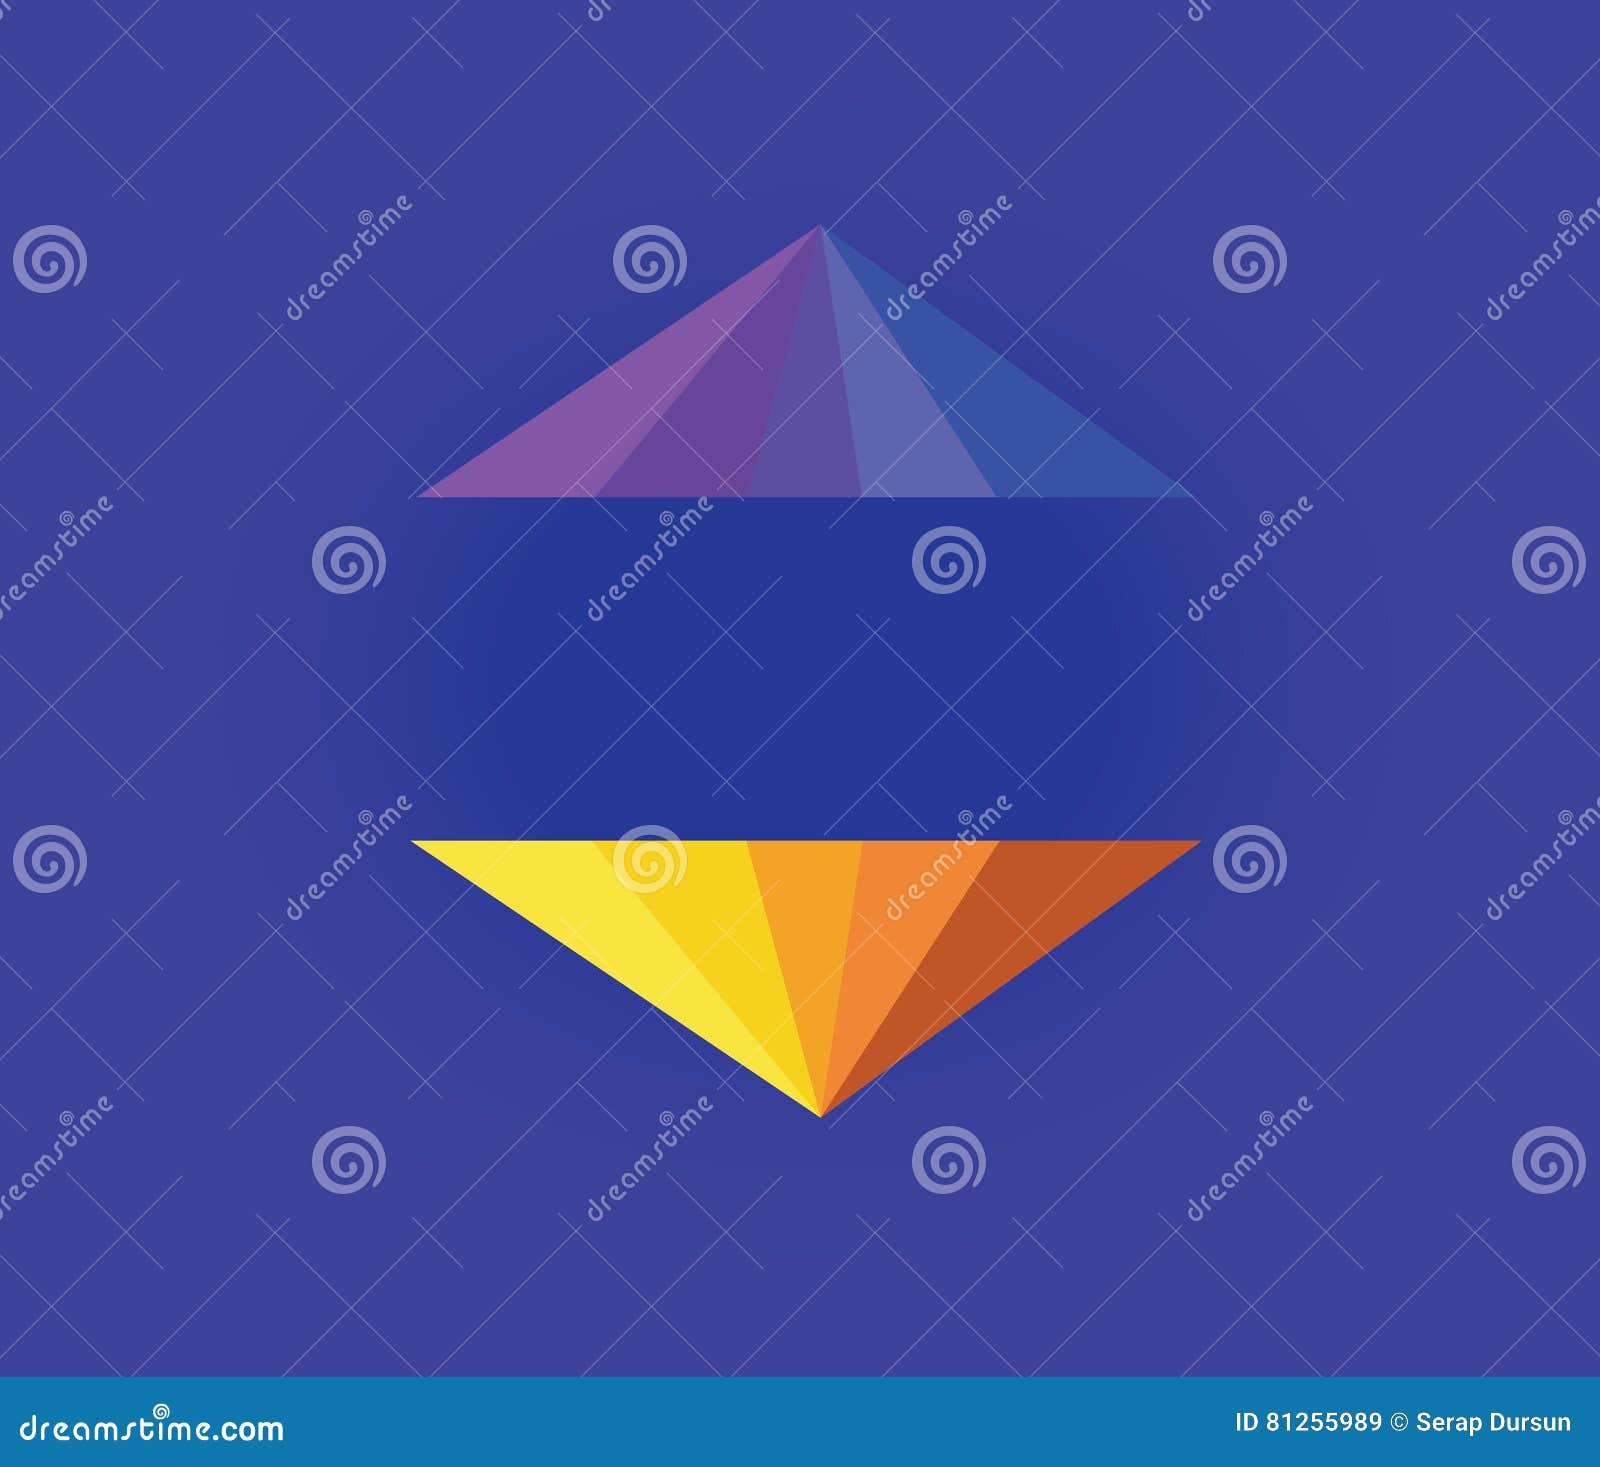 Abstract Colour Pyramid stock vector. Illustration of artistic - 81255989